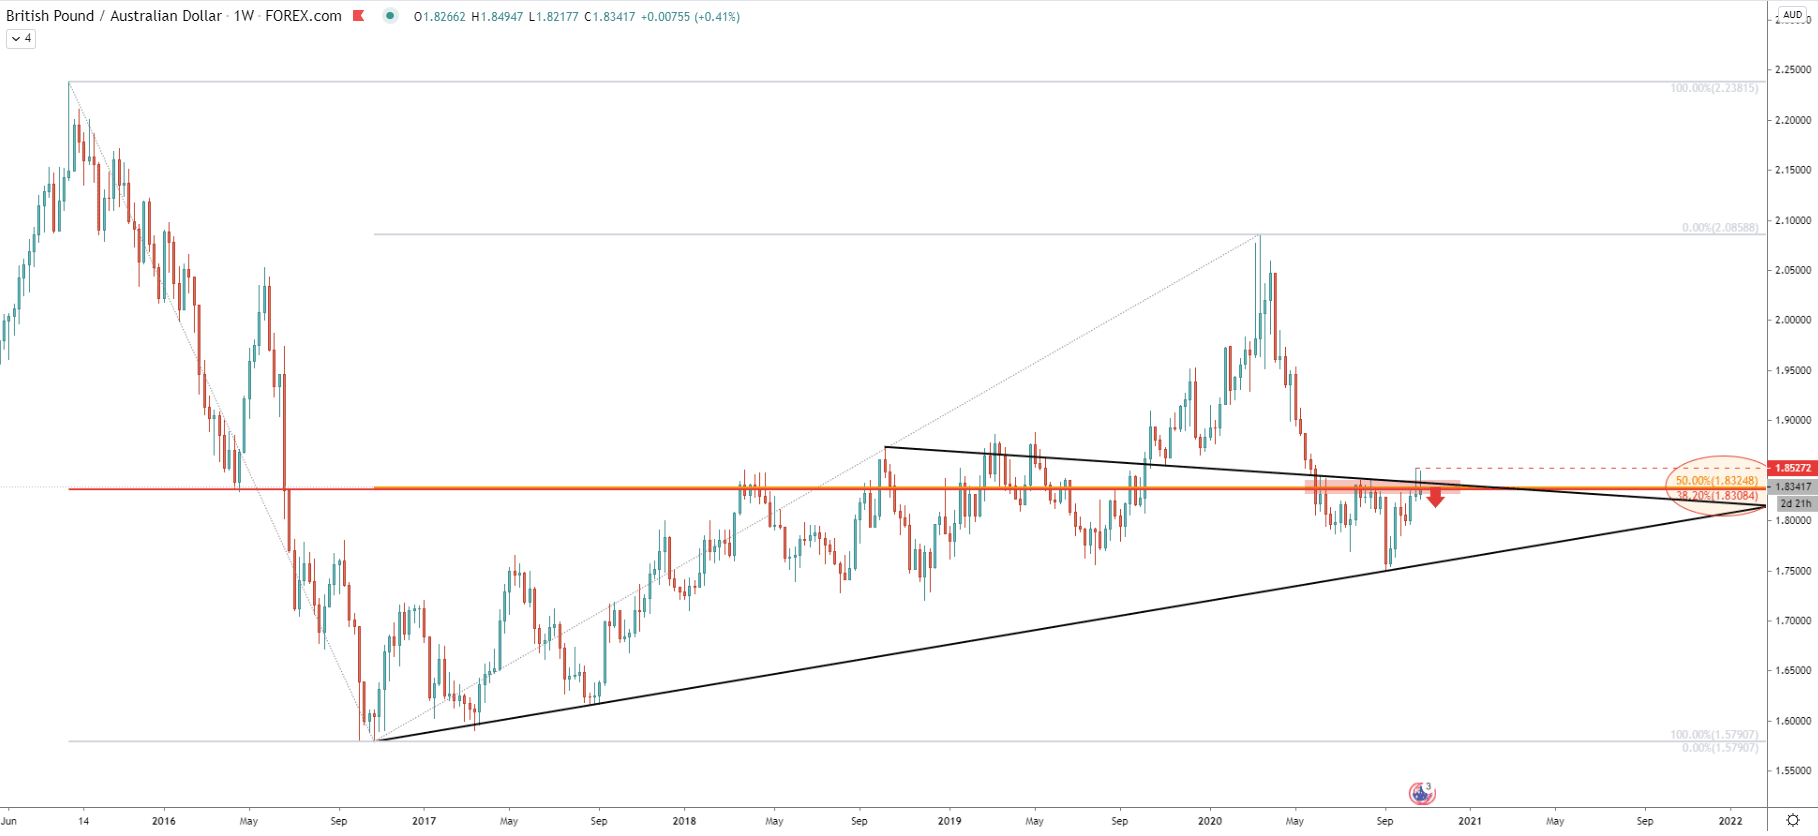 GBP/AUD Weekly Technical Analysis 30 Oct 2020